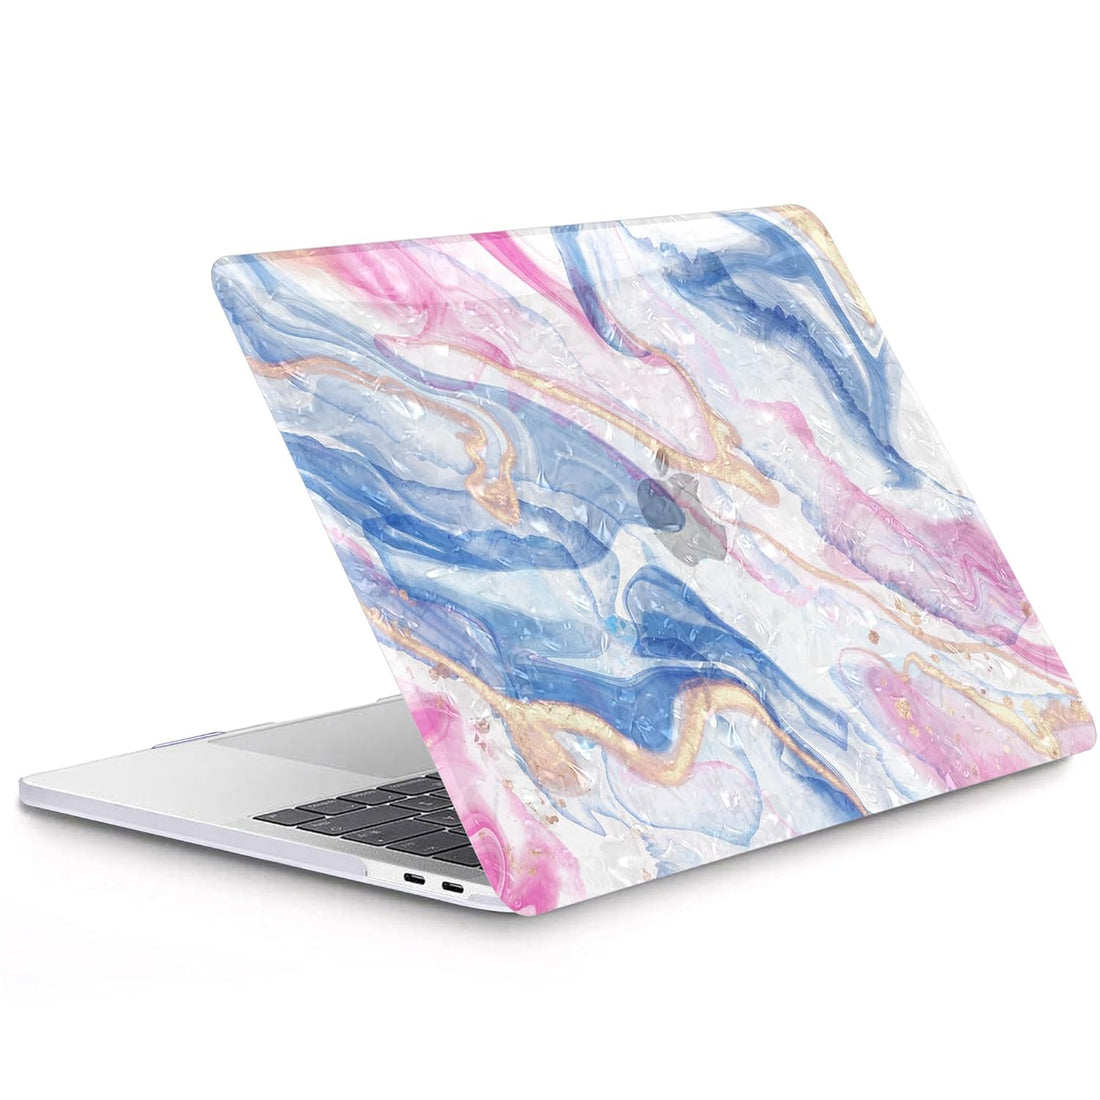 G JGOO Compatible with MacBook Air 13 inch Case 2022 2021 2020 2019 2018 Release M1 A2337 A2179 A1932 Touch ID, Glitter Pearl Hard Shell Case + 2 Keyboard Covers + Screen Protector, Colorful Marble